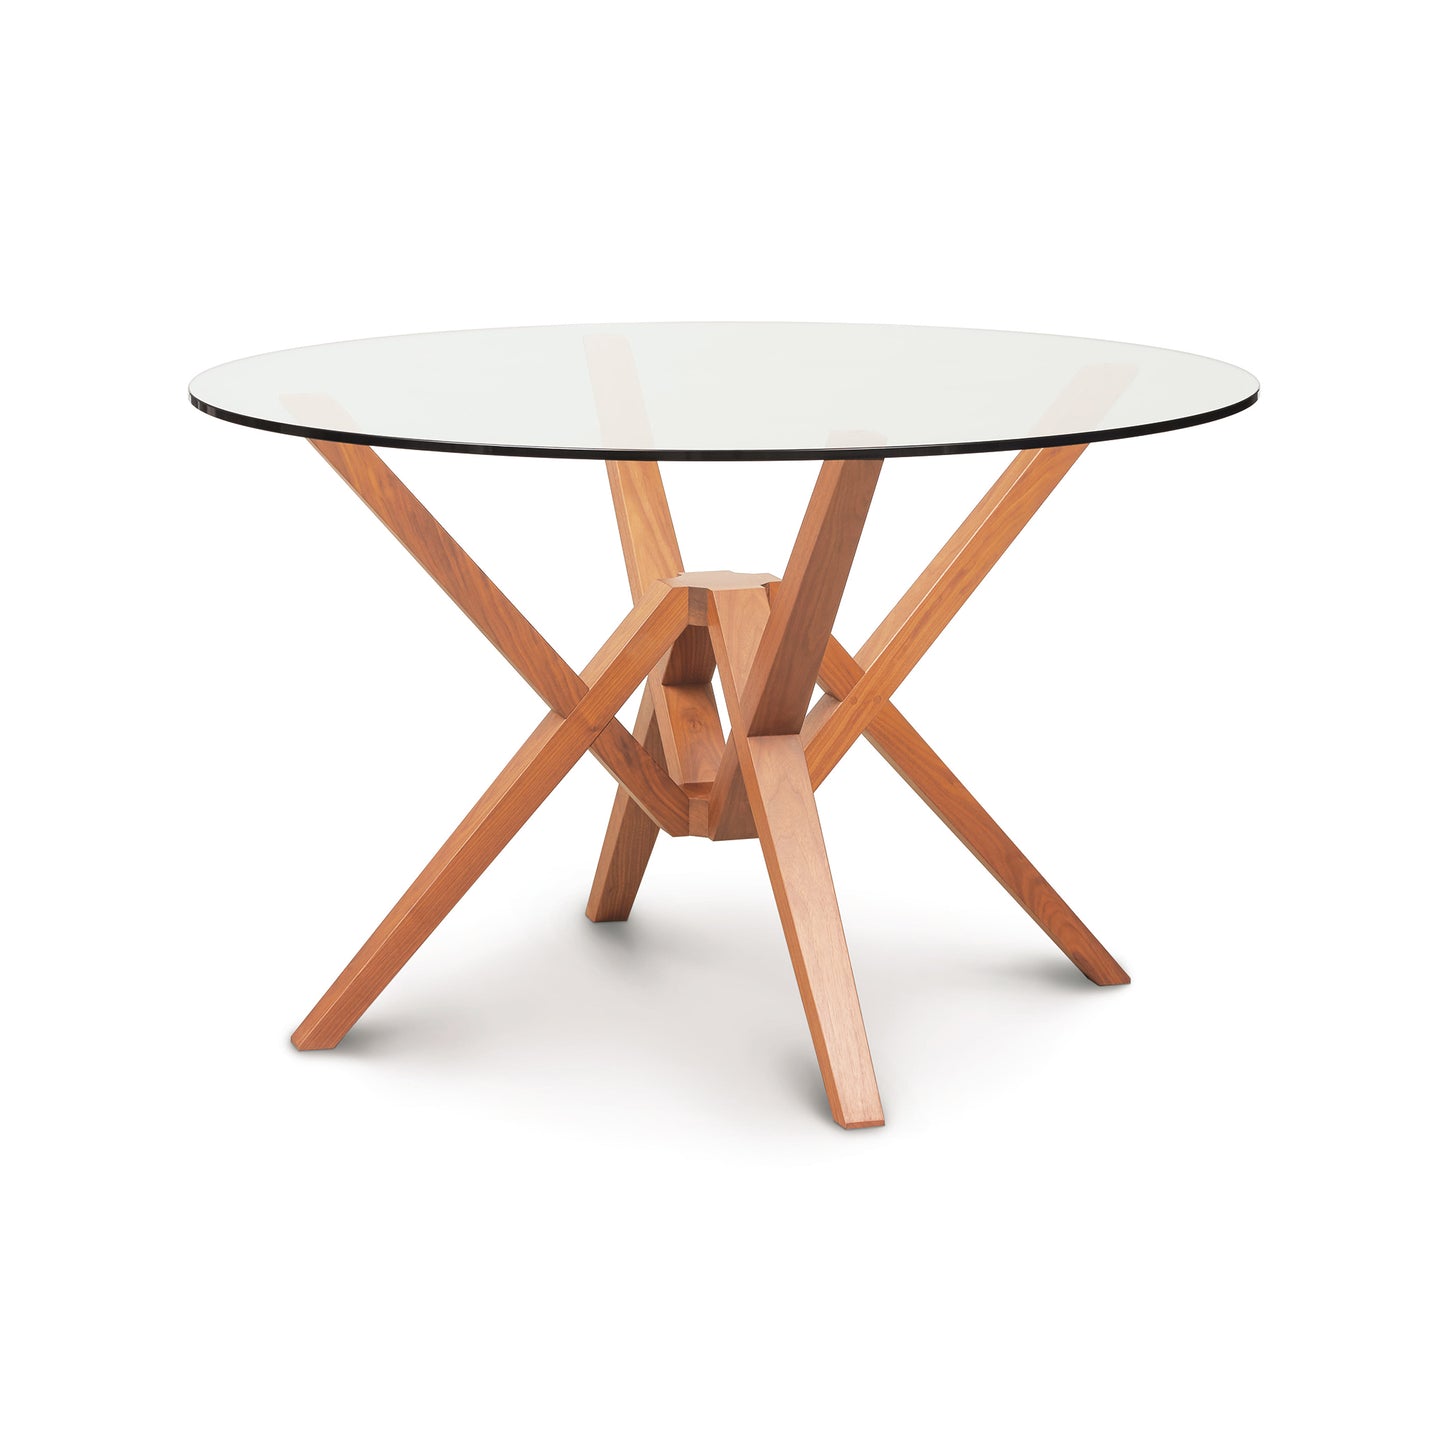 Copeland Furniture's Exeter Round Glass Top Table - an innovative engineering marvel with a sleek isometric design, featuring a glass top and wooden legs.